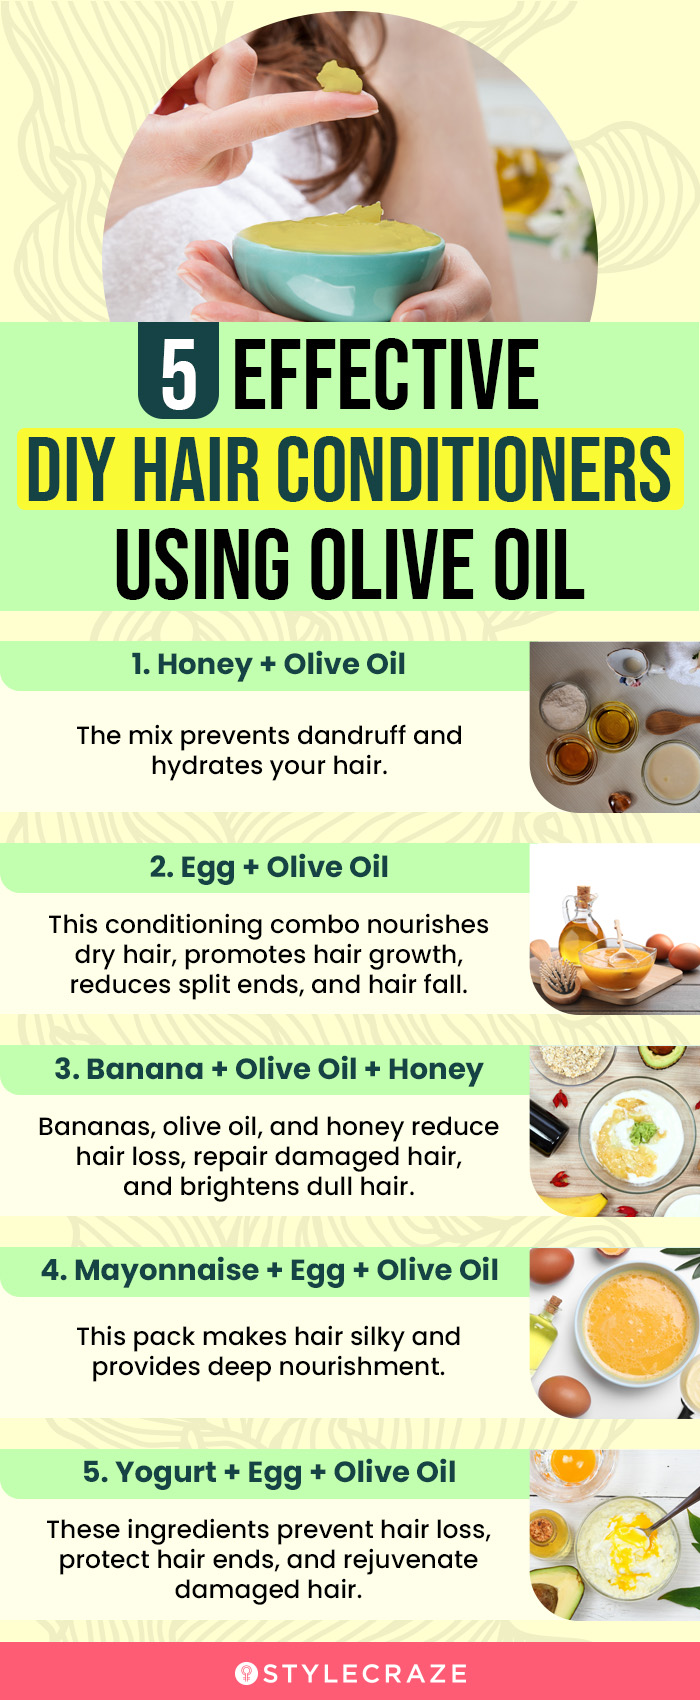 5 effective diy hair conditioners using olive oil [infographic]